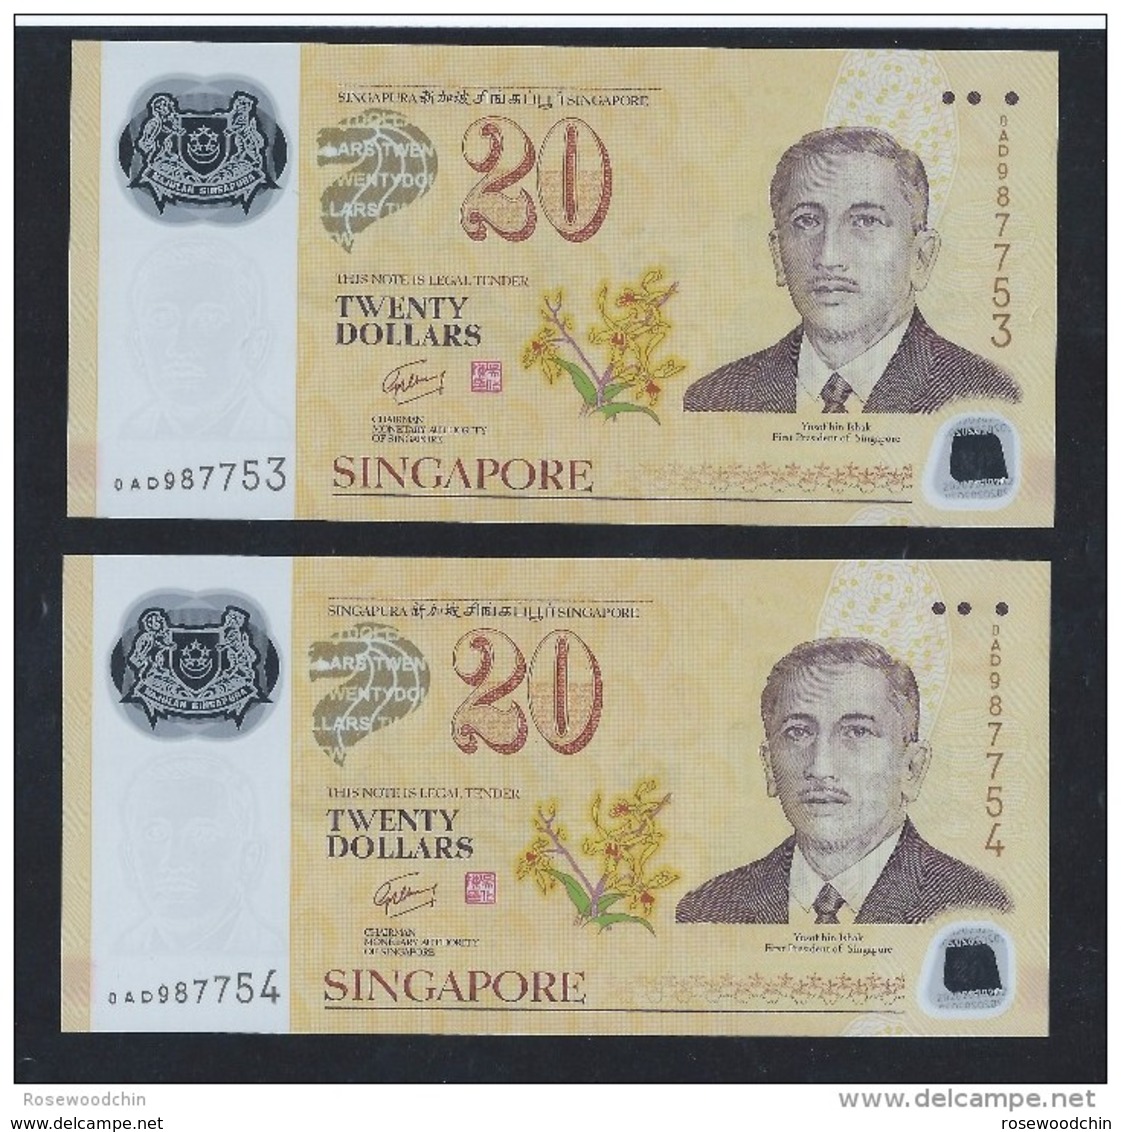 Pair Of 2 Pcs. 2007 SINGAPORE BRUNEI  POLYMER $20 Running Number CURRENCY BANKNOTE (#66) - Singapore